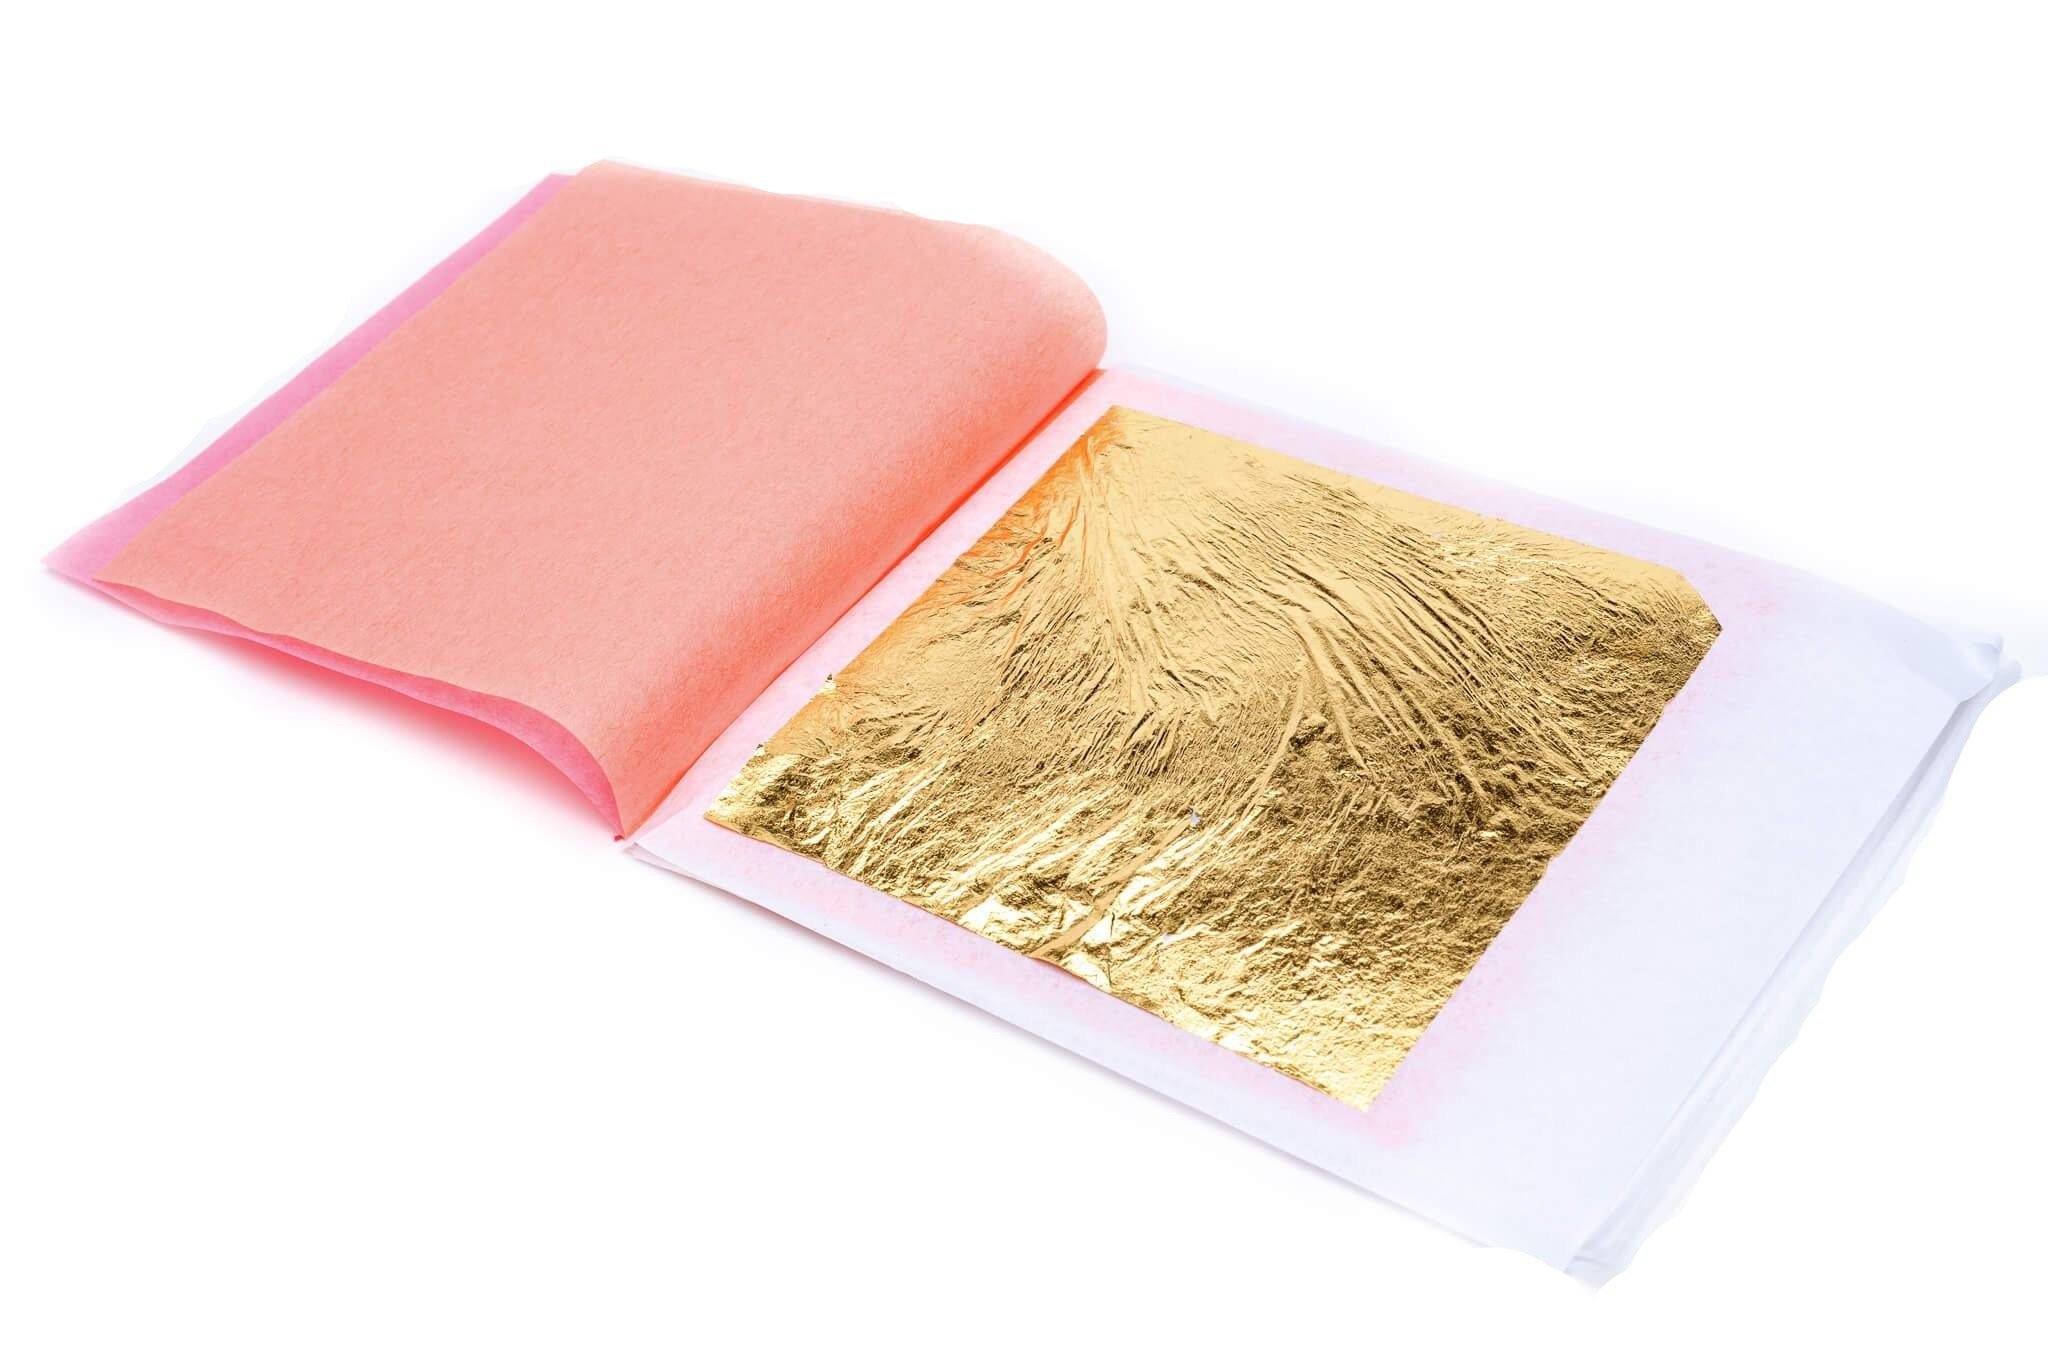 Slofoodgroup 24K Edible Gold Leaf - Cooking and Cake Decoration - 10 Loose  Sheets 